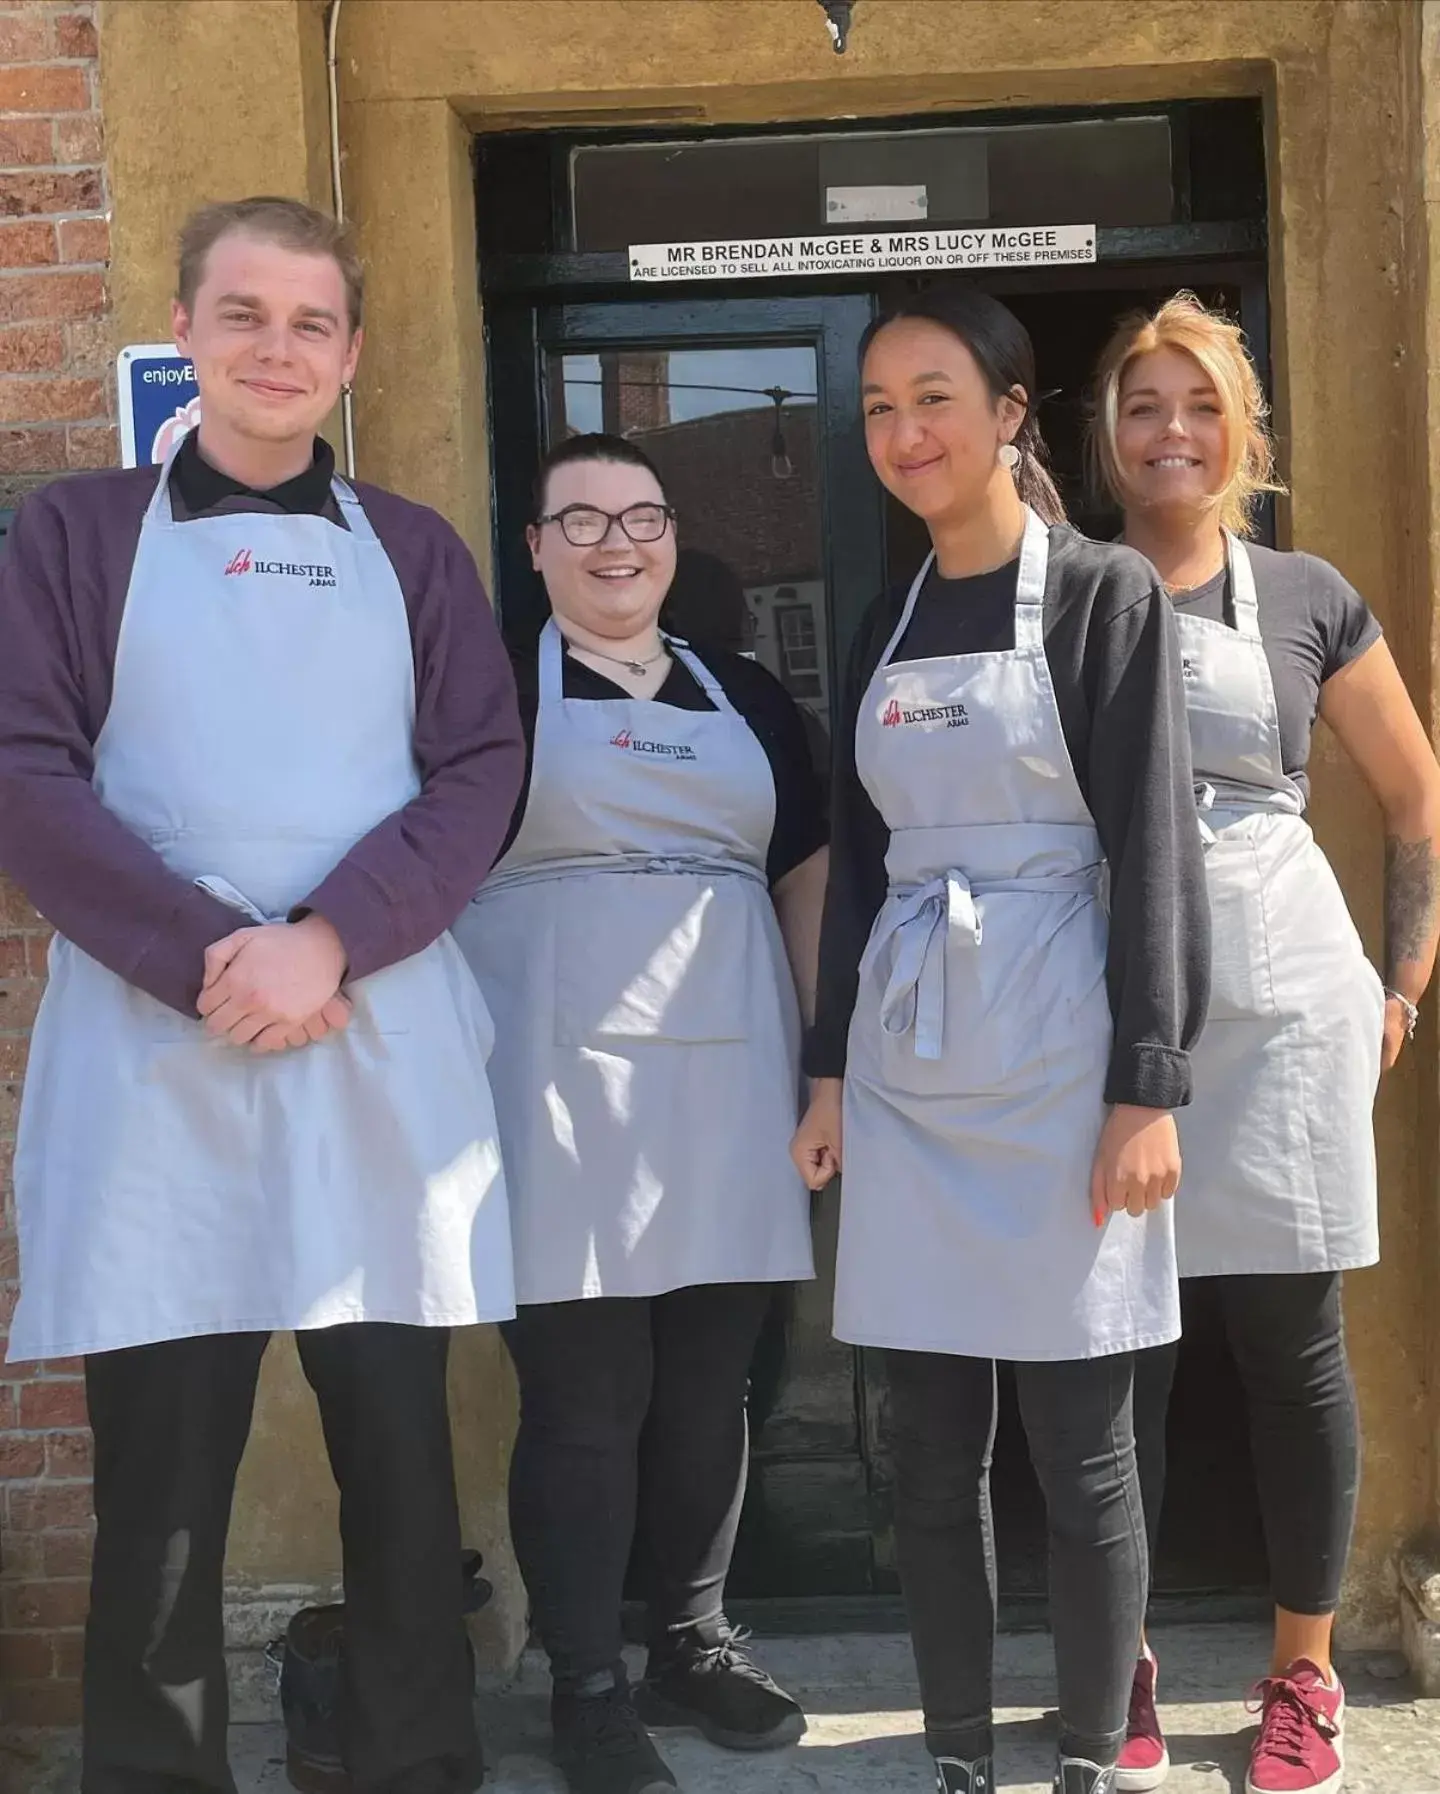 Staff in The Ilchester Arms Hotel, Ilchester Somerset